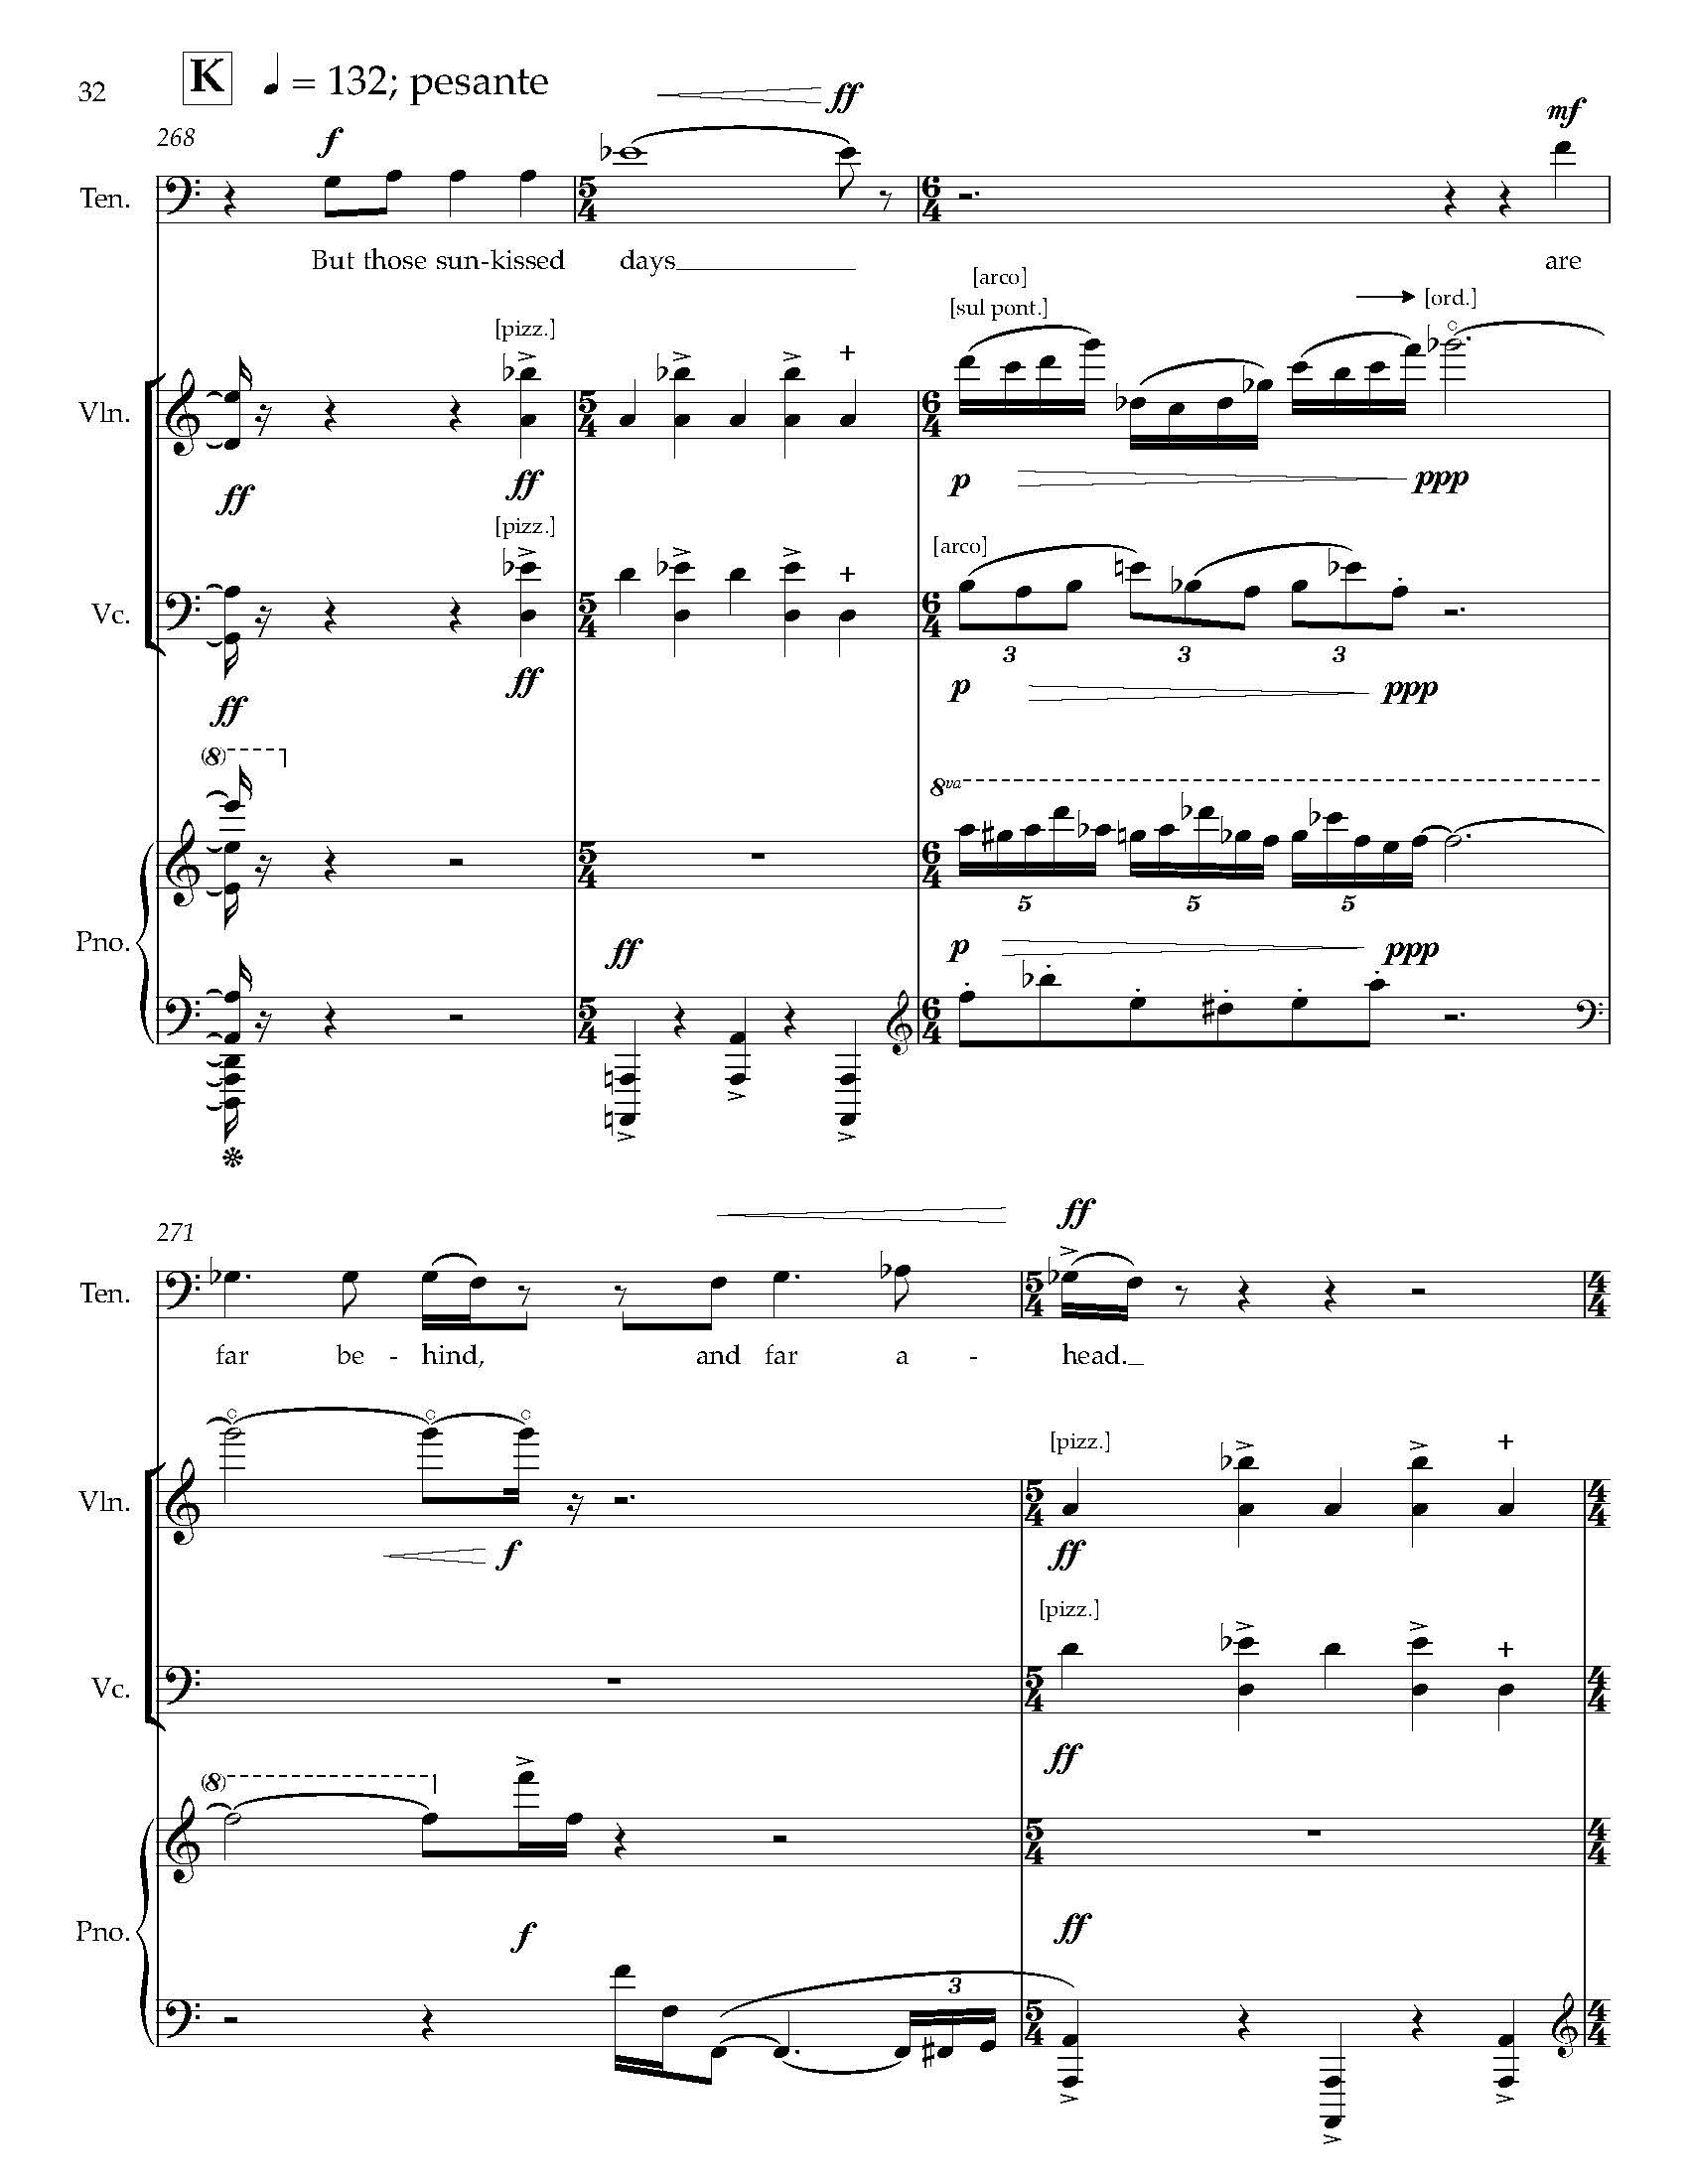 Gursky Songs - Complete Score_Page_40.jpg